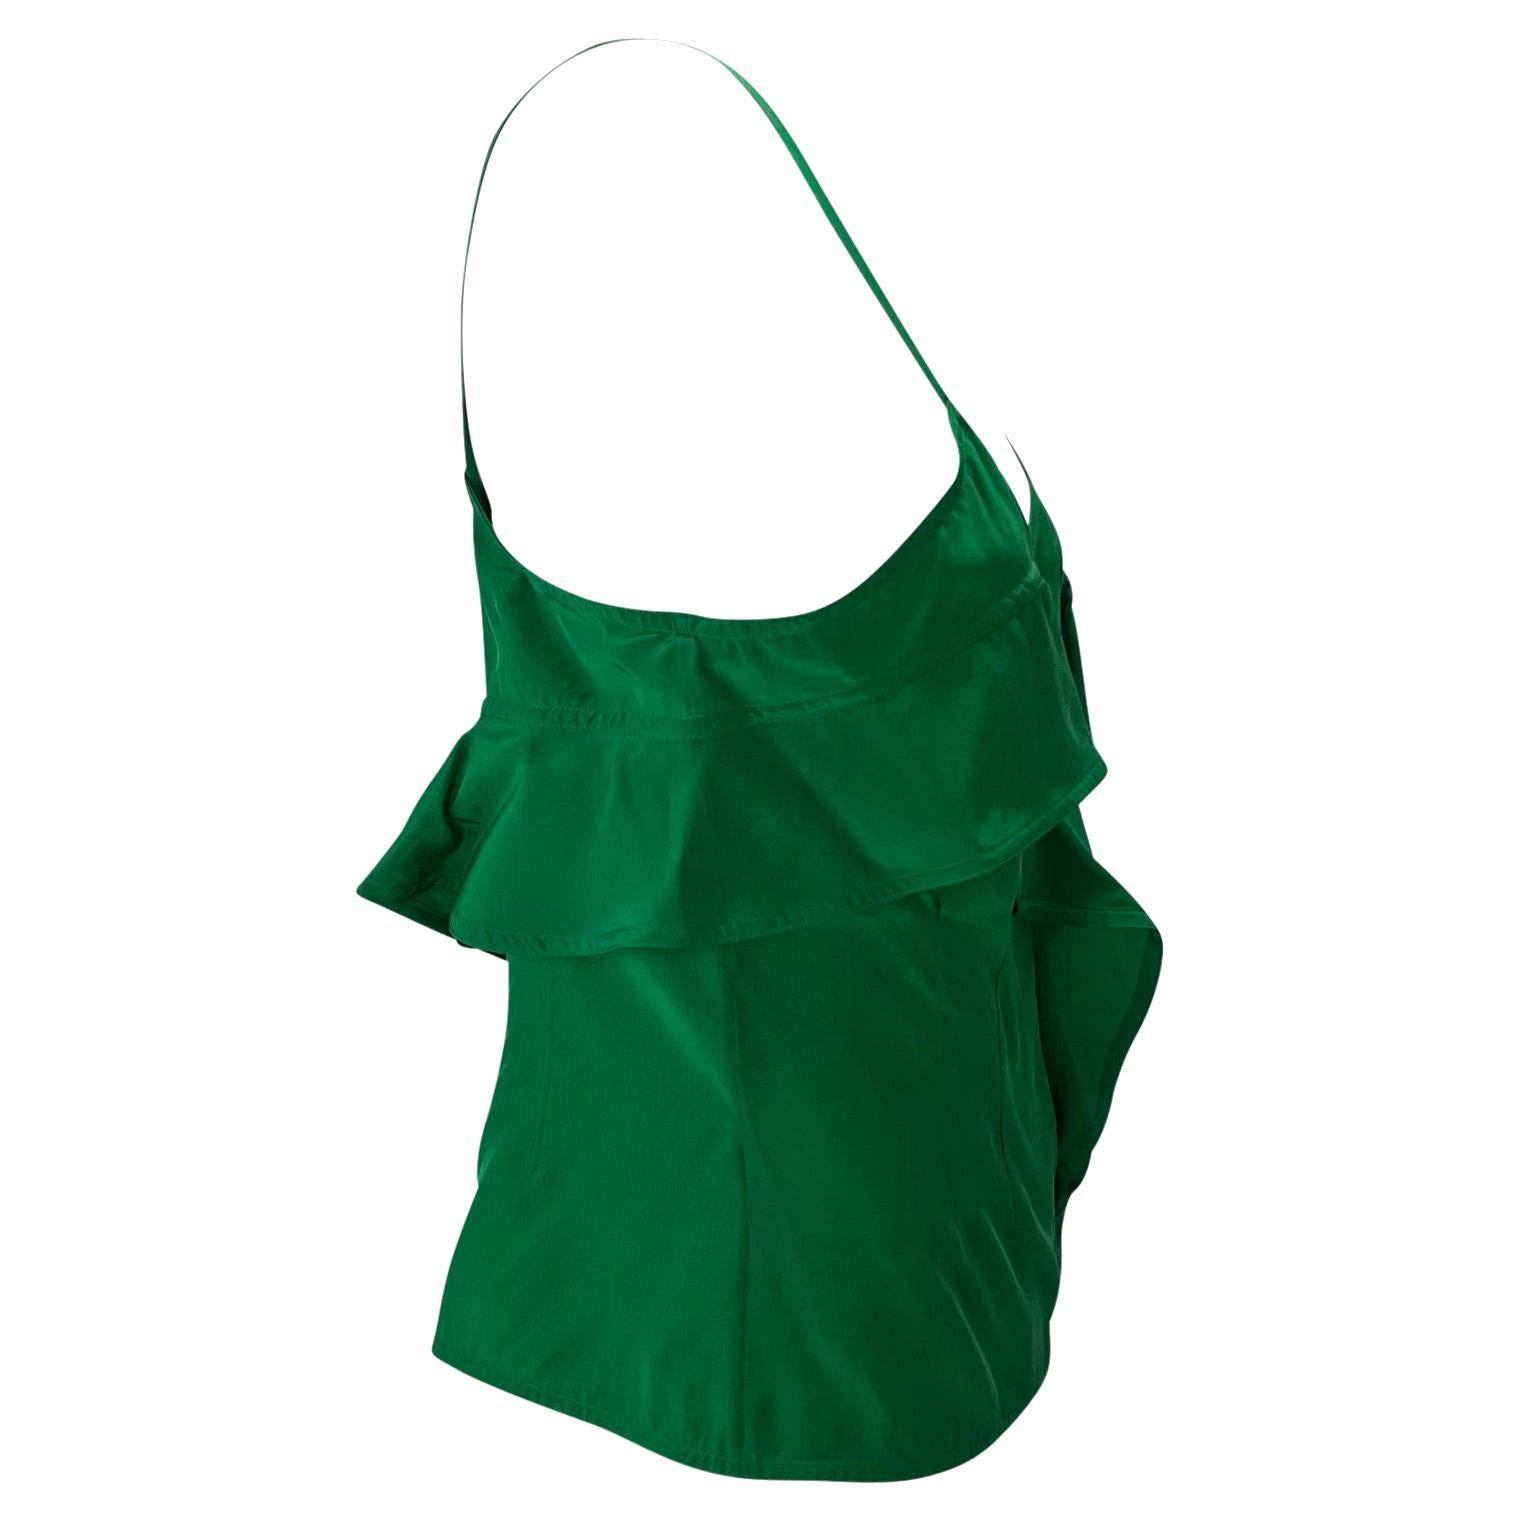 Women's F/W 2003 Yves Saint Laurent by Tom Ford Emerald Green Silk Ruffle Tank Top For Sale